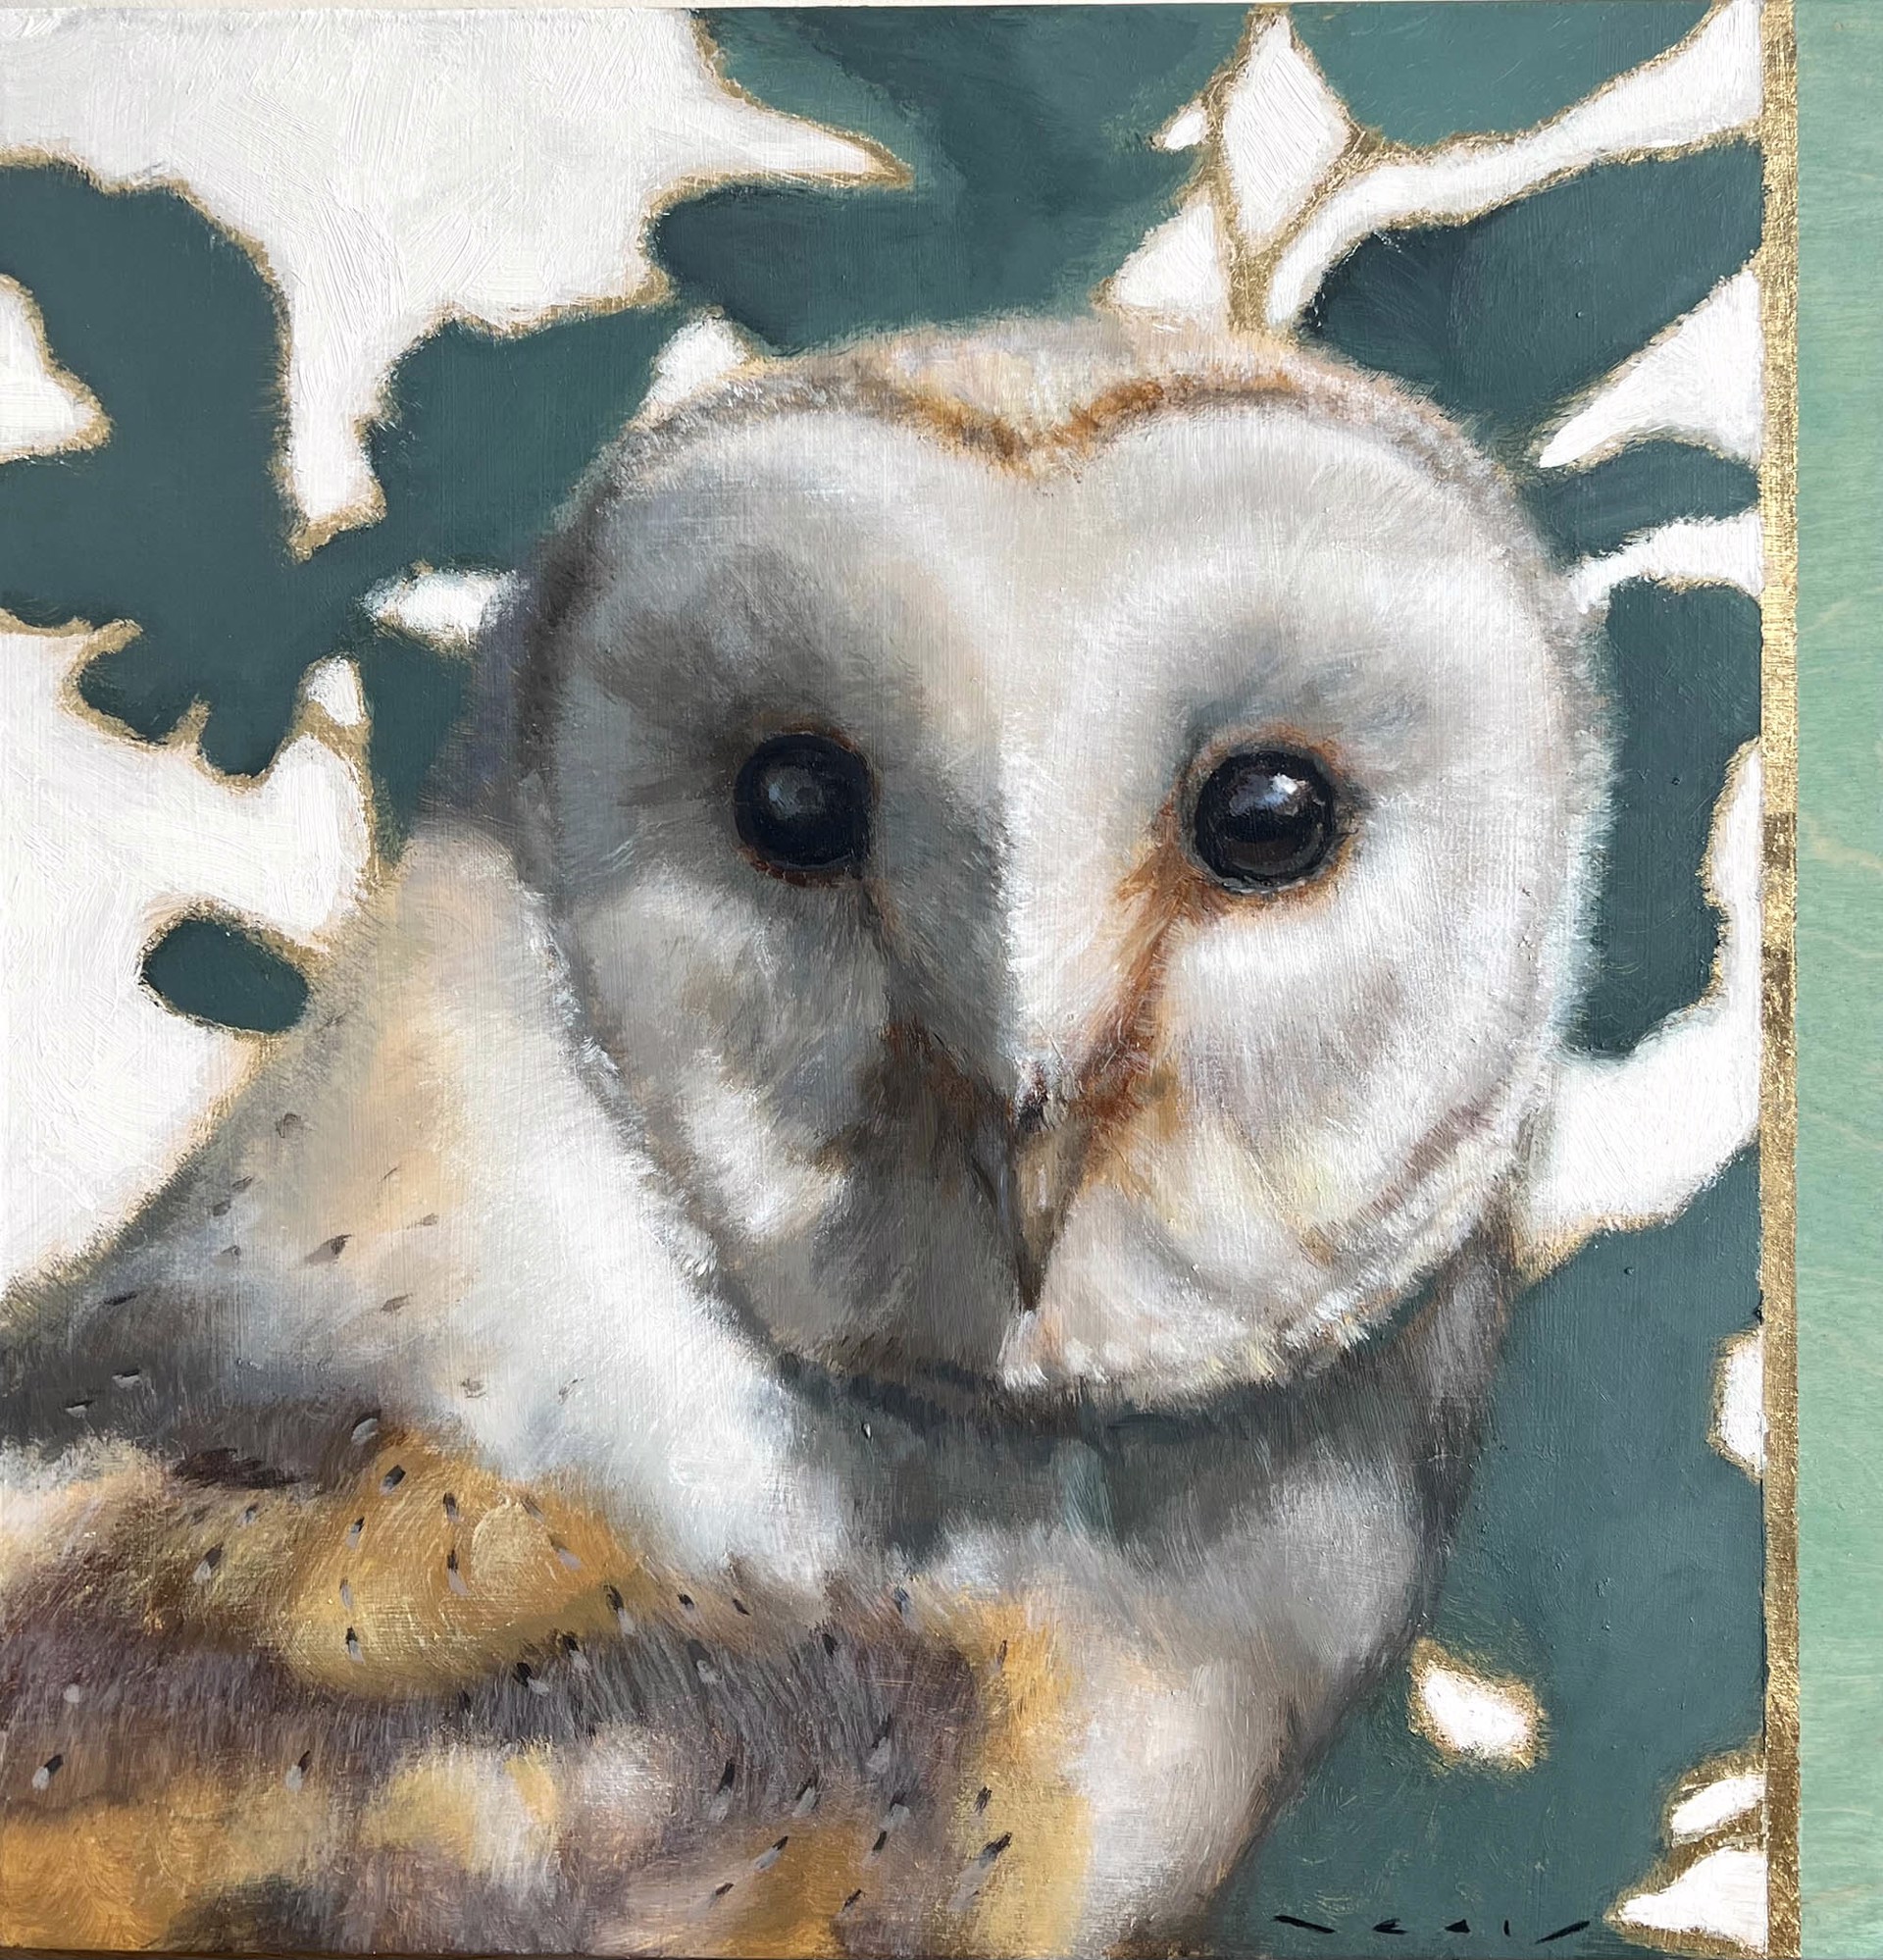 Original Mixed Media Painting By Nealy Riley Featuring A Barn Owl On Abstract Background With Green Floral Motifs